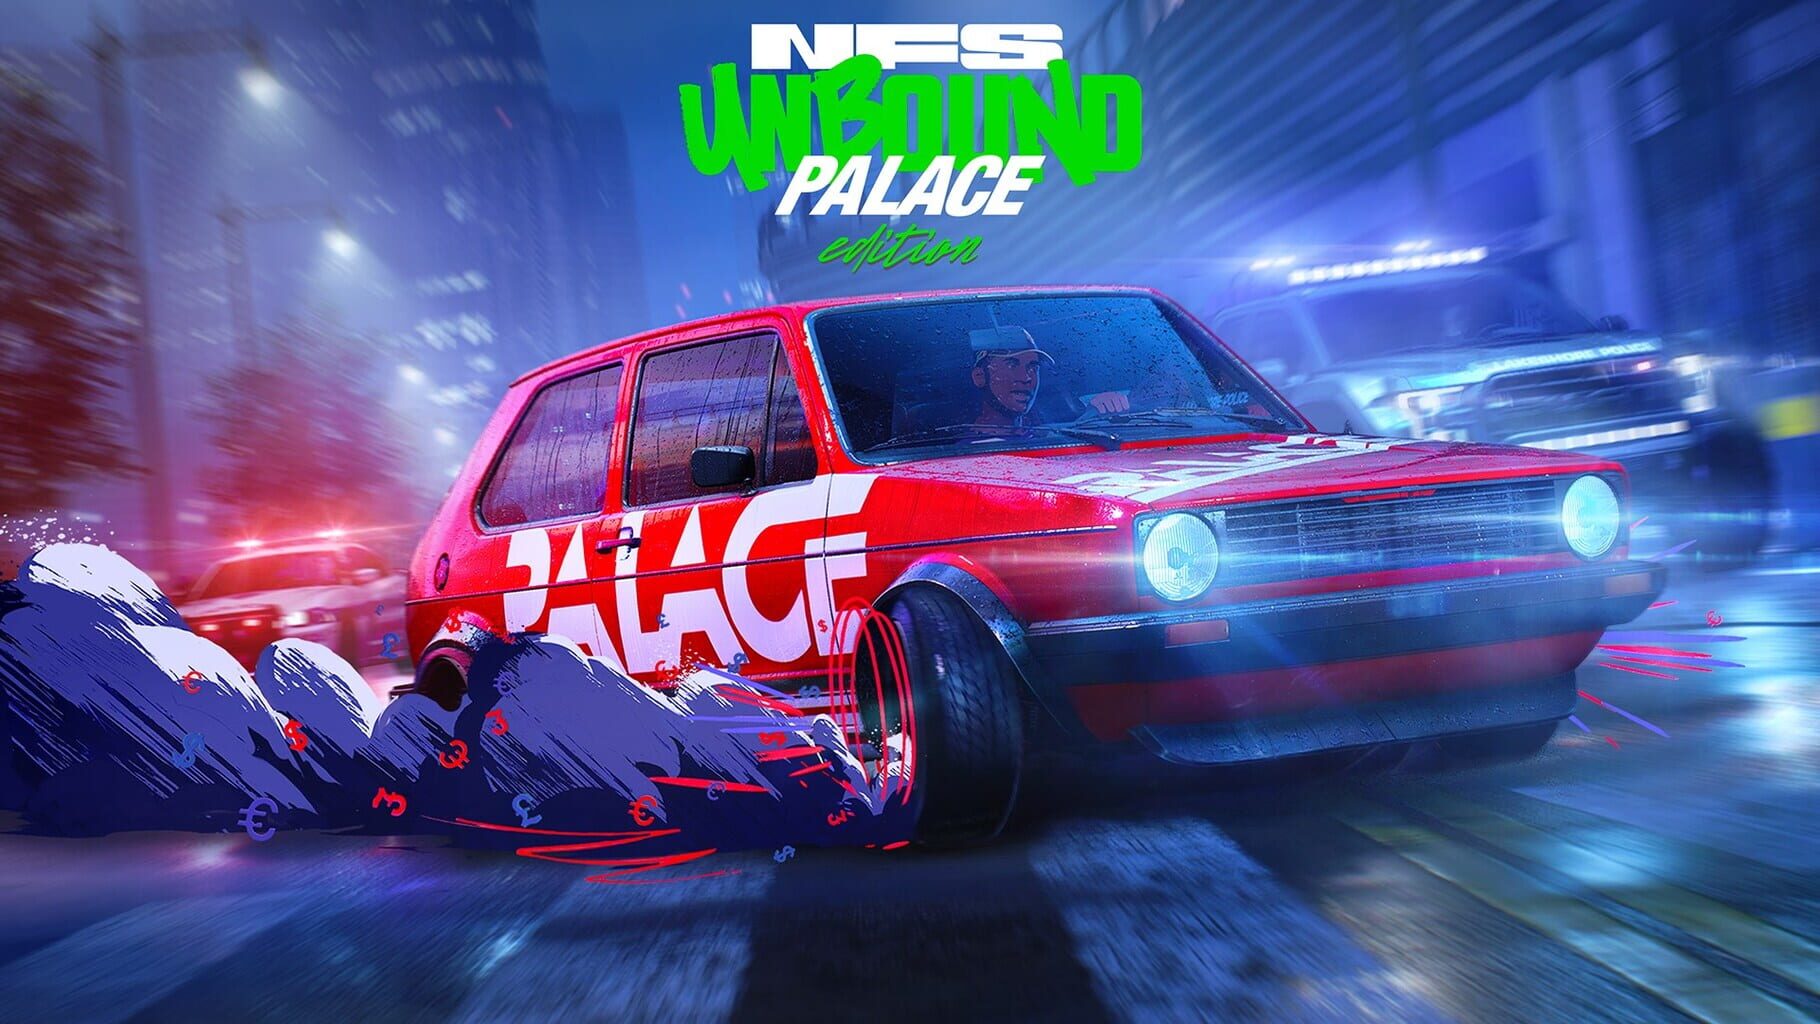 Arte - Need for Speed Unbound: Palace Edition